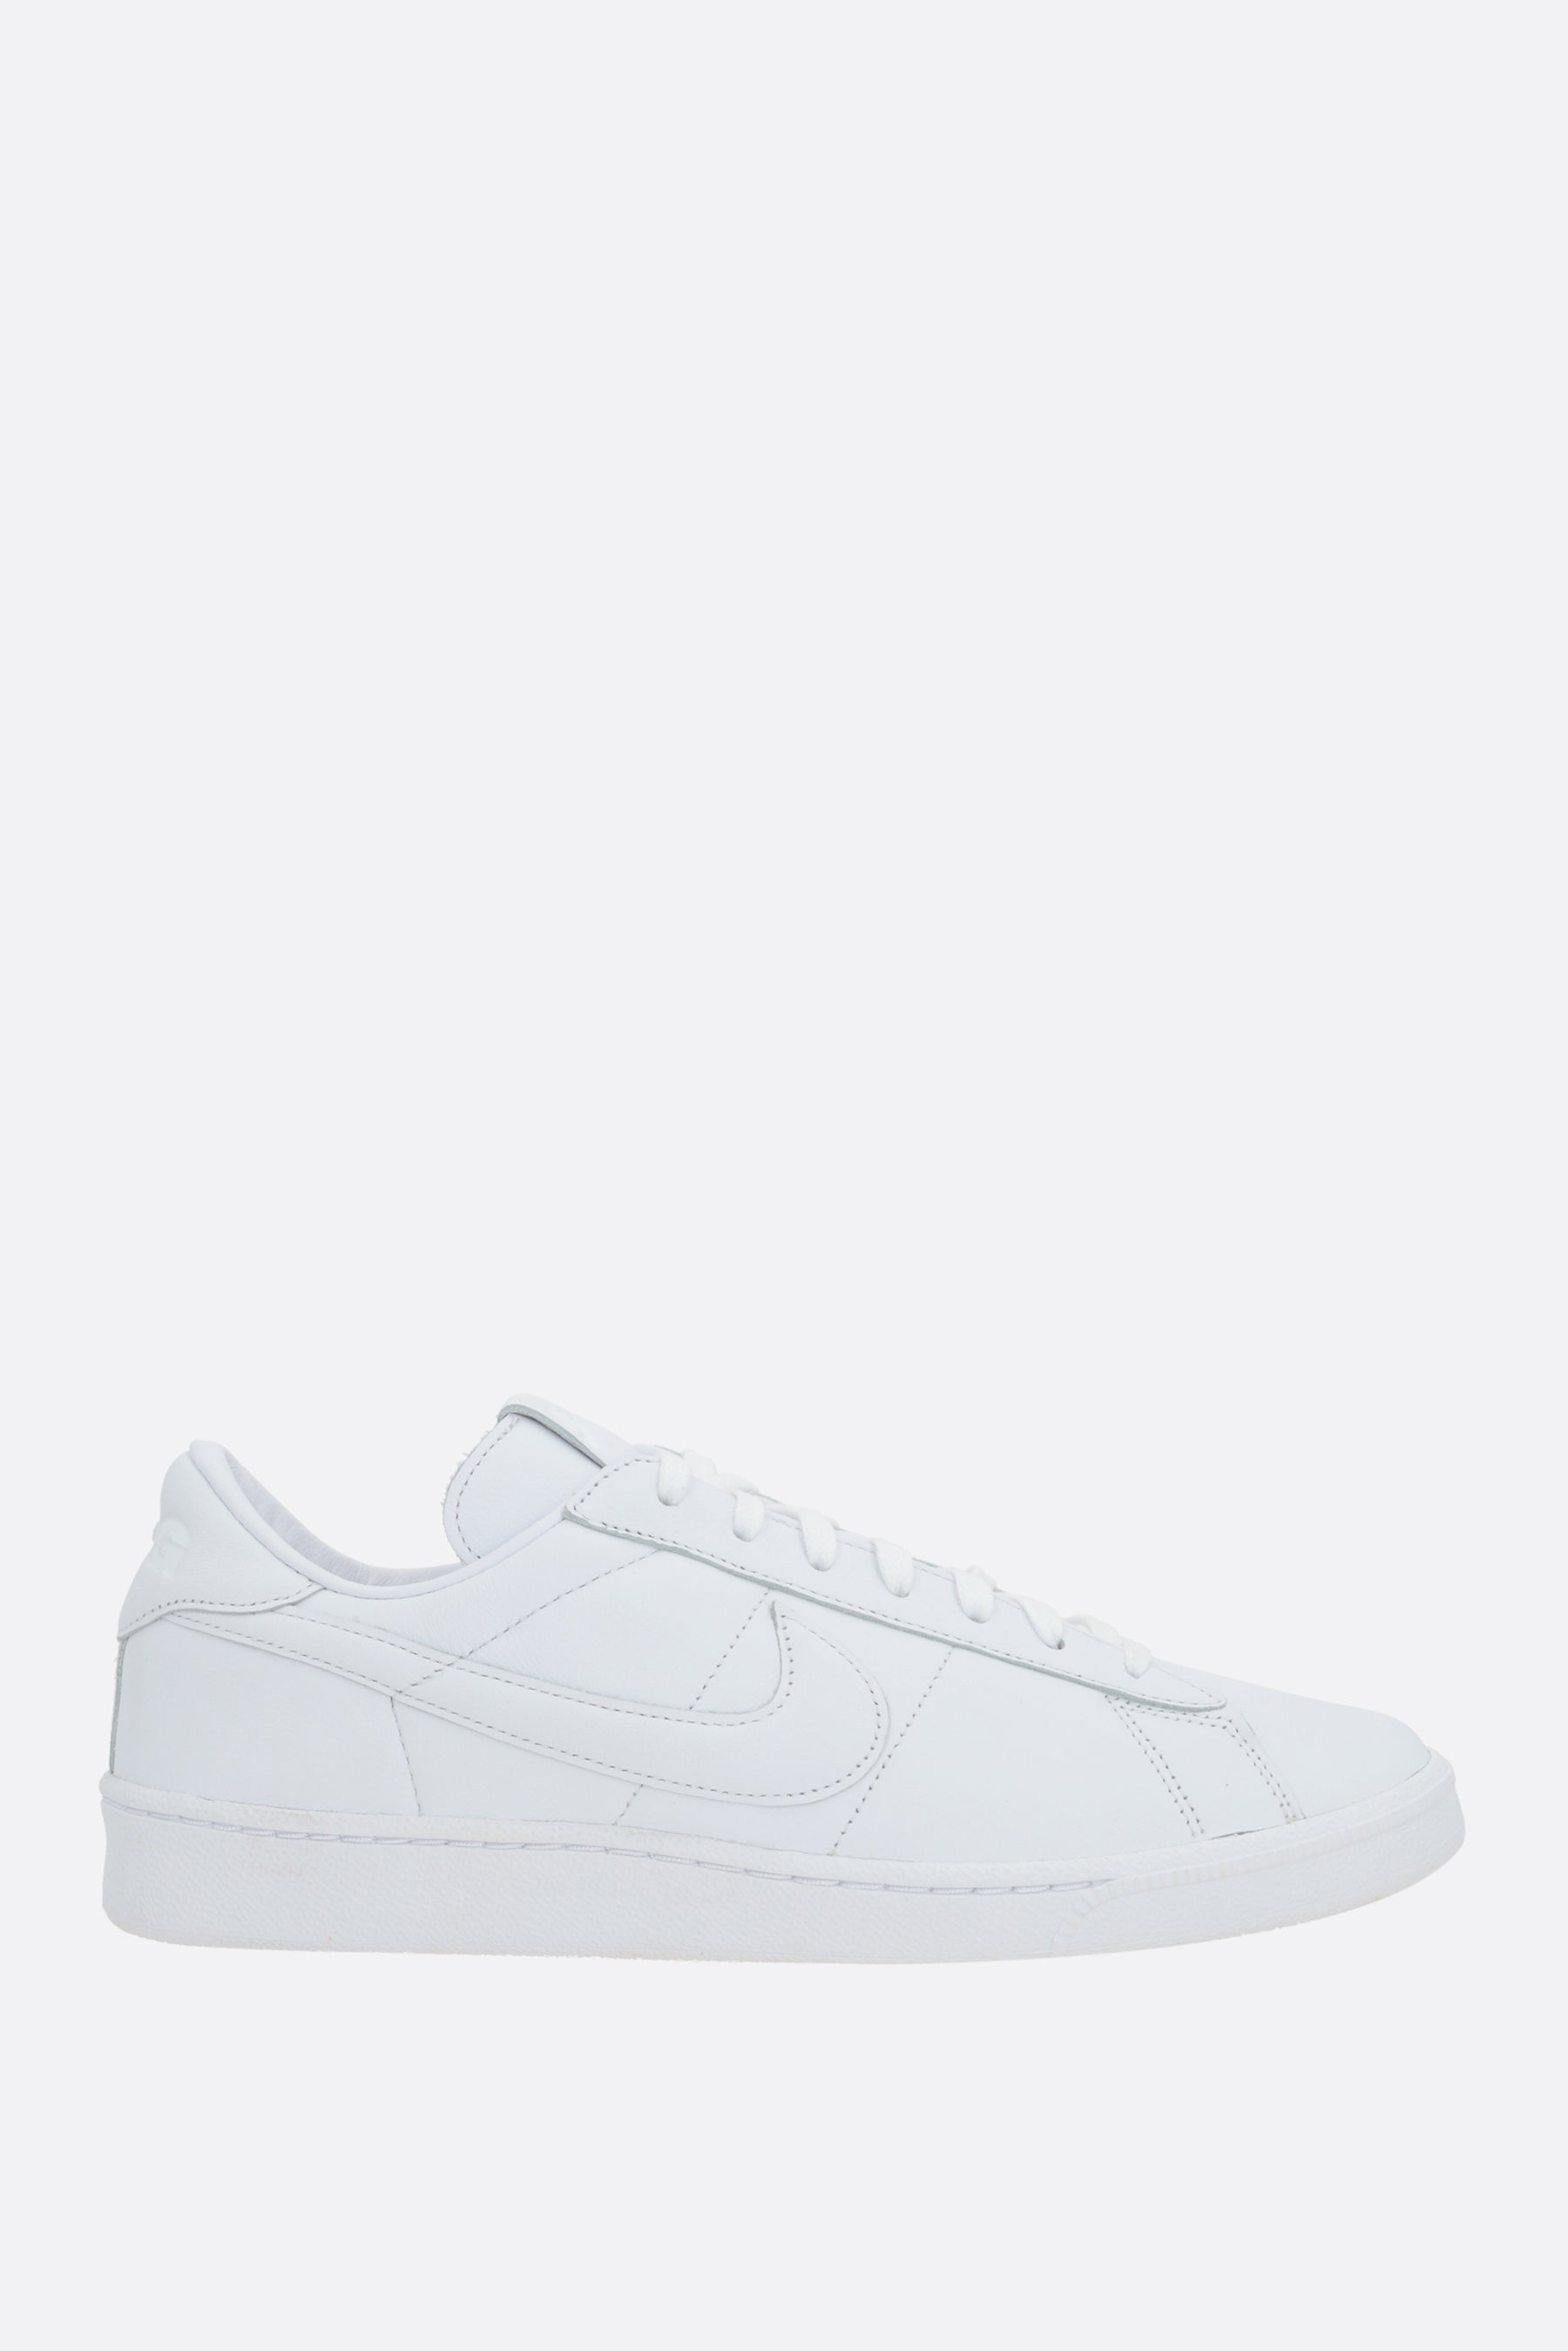 Nike Tennis Classic smooth leather sneakers